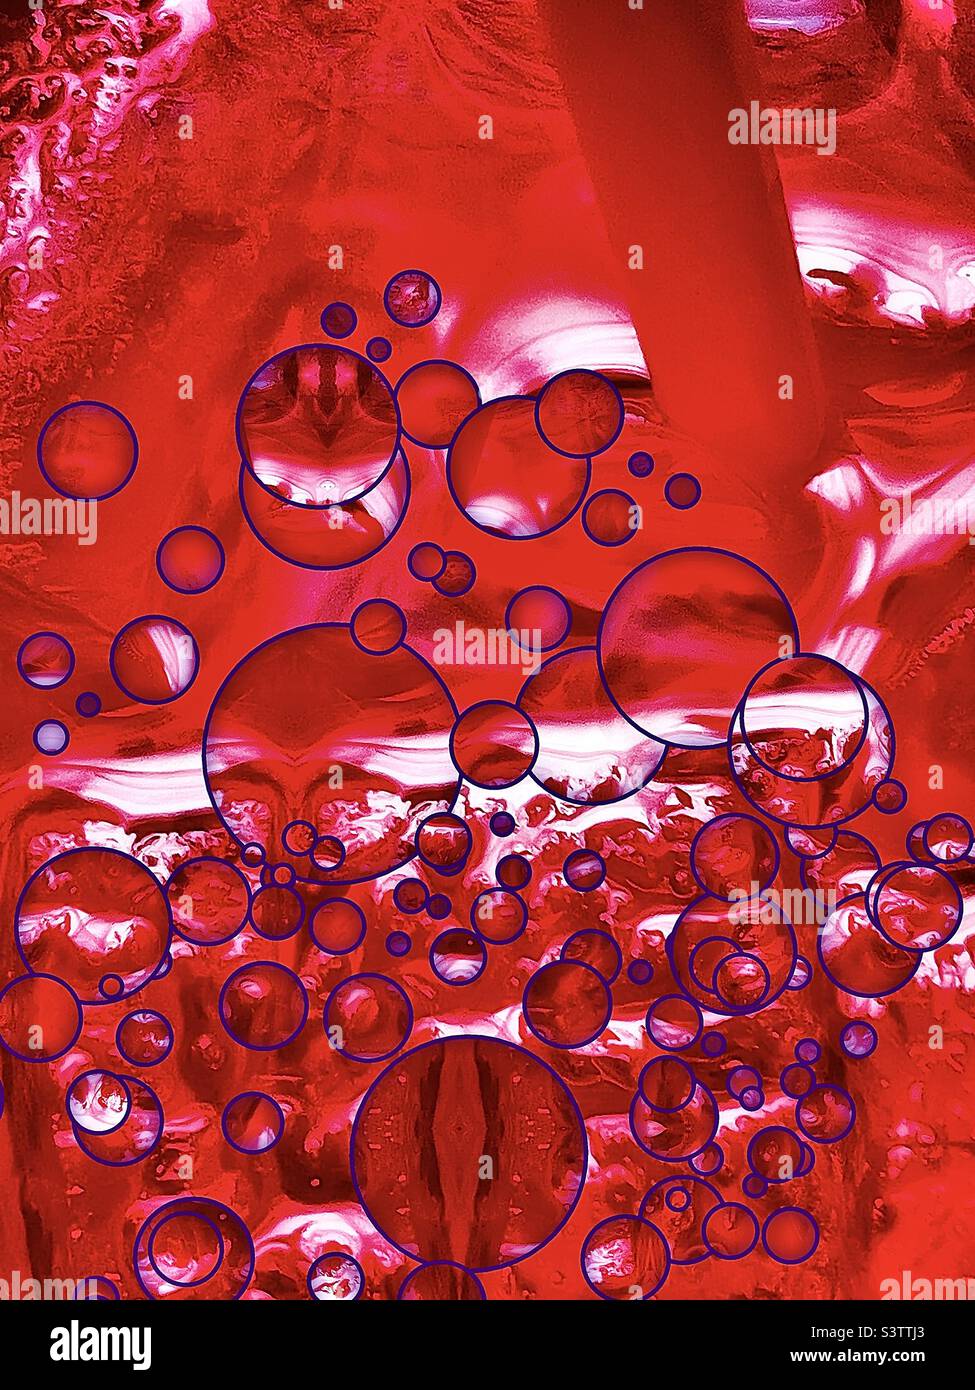 Looking down into a large cup of ice cold cherry sprite. Purple bubbles have been digitally added to the red beverage, straw and ice cubes to make a refreshing abstract. Stock Photo